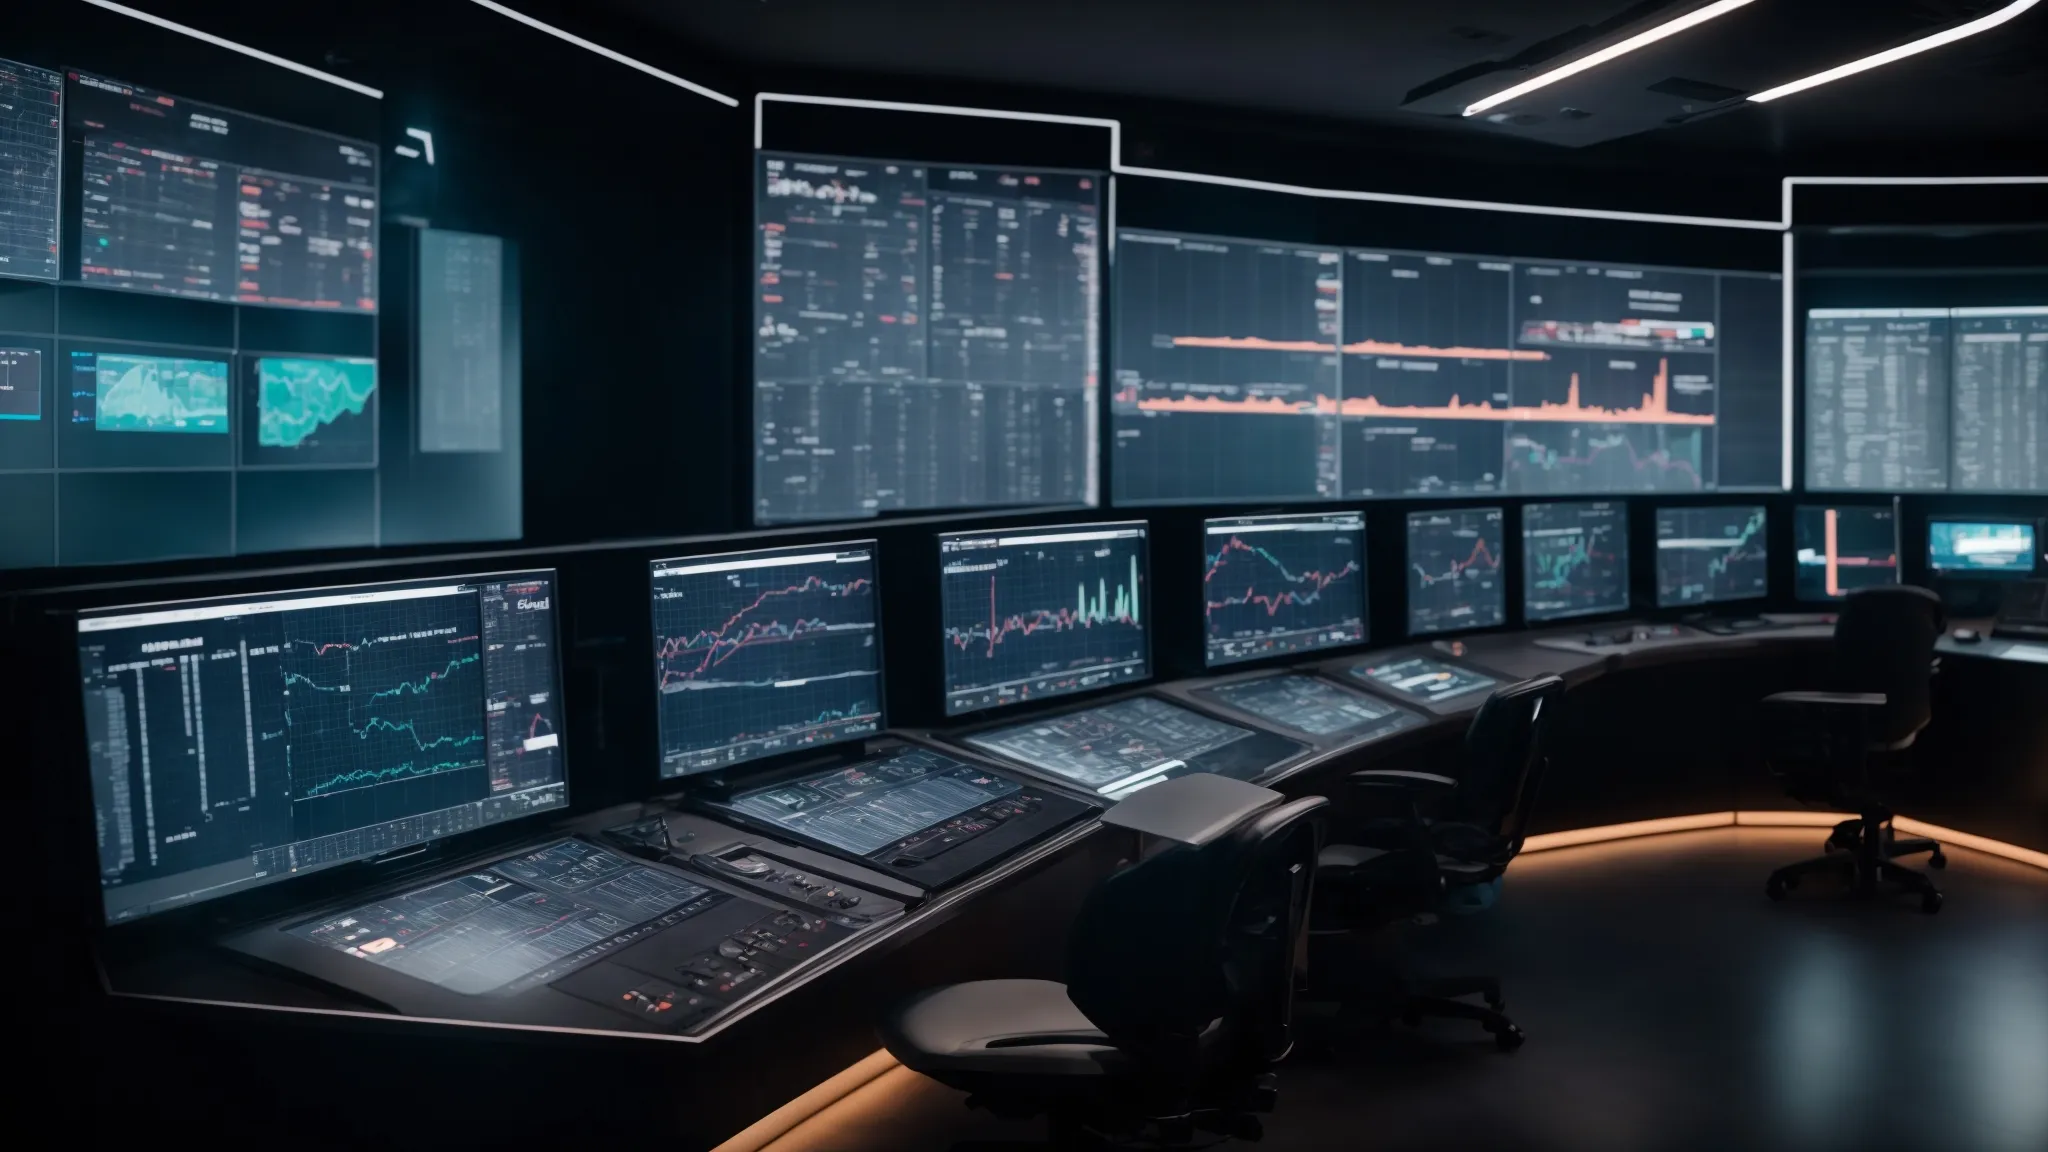 a futuristic control room with screens displaying graphs and analytics.